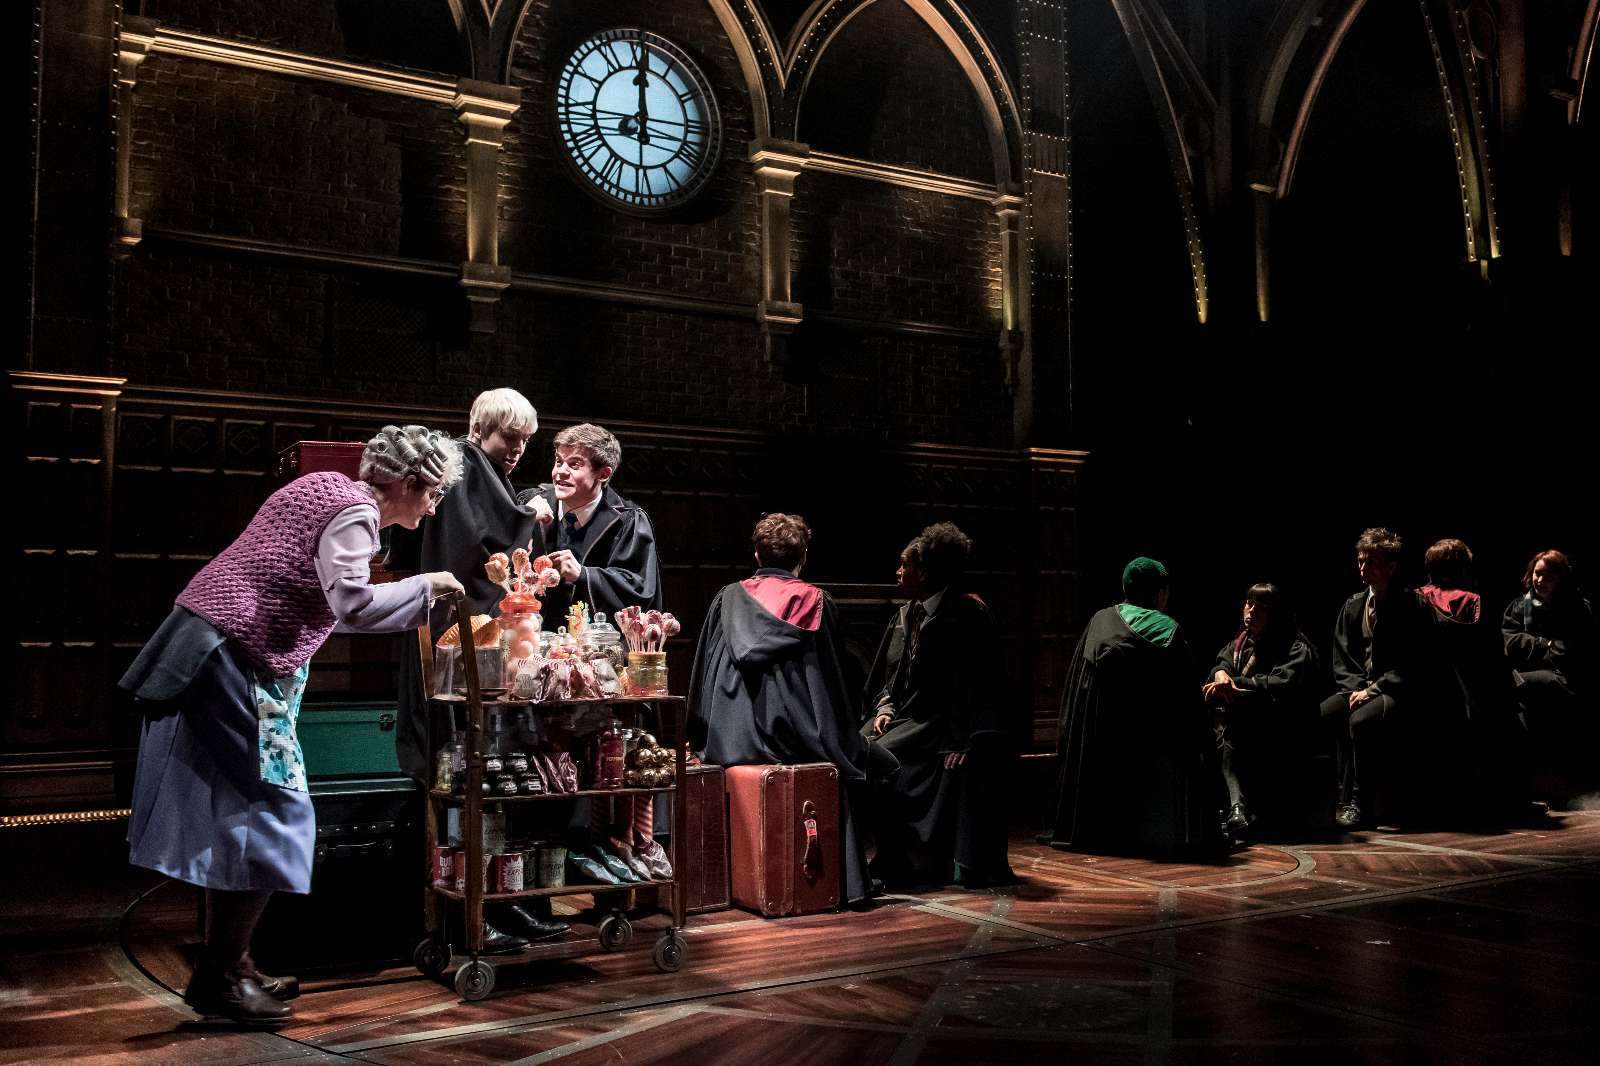 The 9 ¾ Most WTF Moments In Harry Potter And The Cursed Child